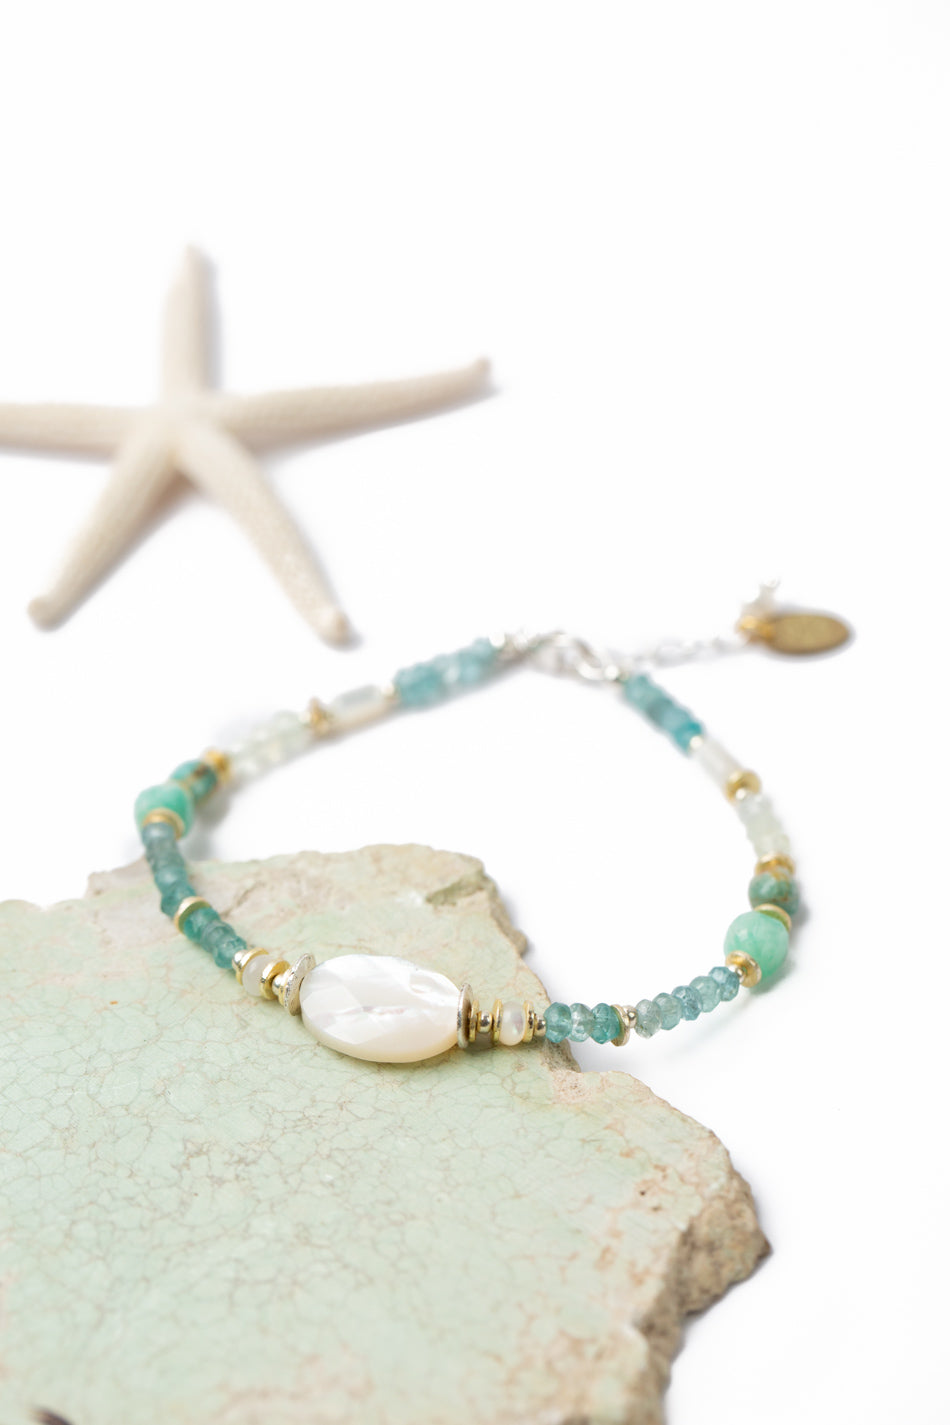 Serenity 7.5-8.5" Blue Apatite, Amazonite, Prehnite With Faceted Mother Of Pearl Collage Bracelet